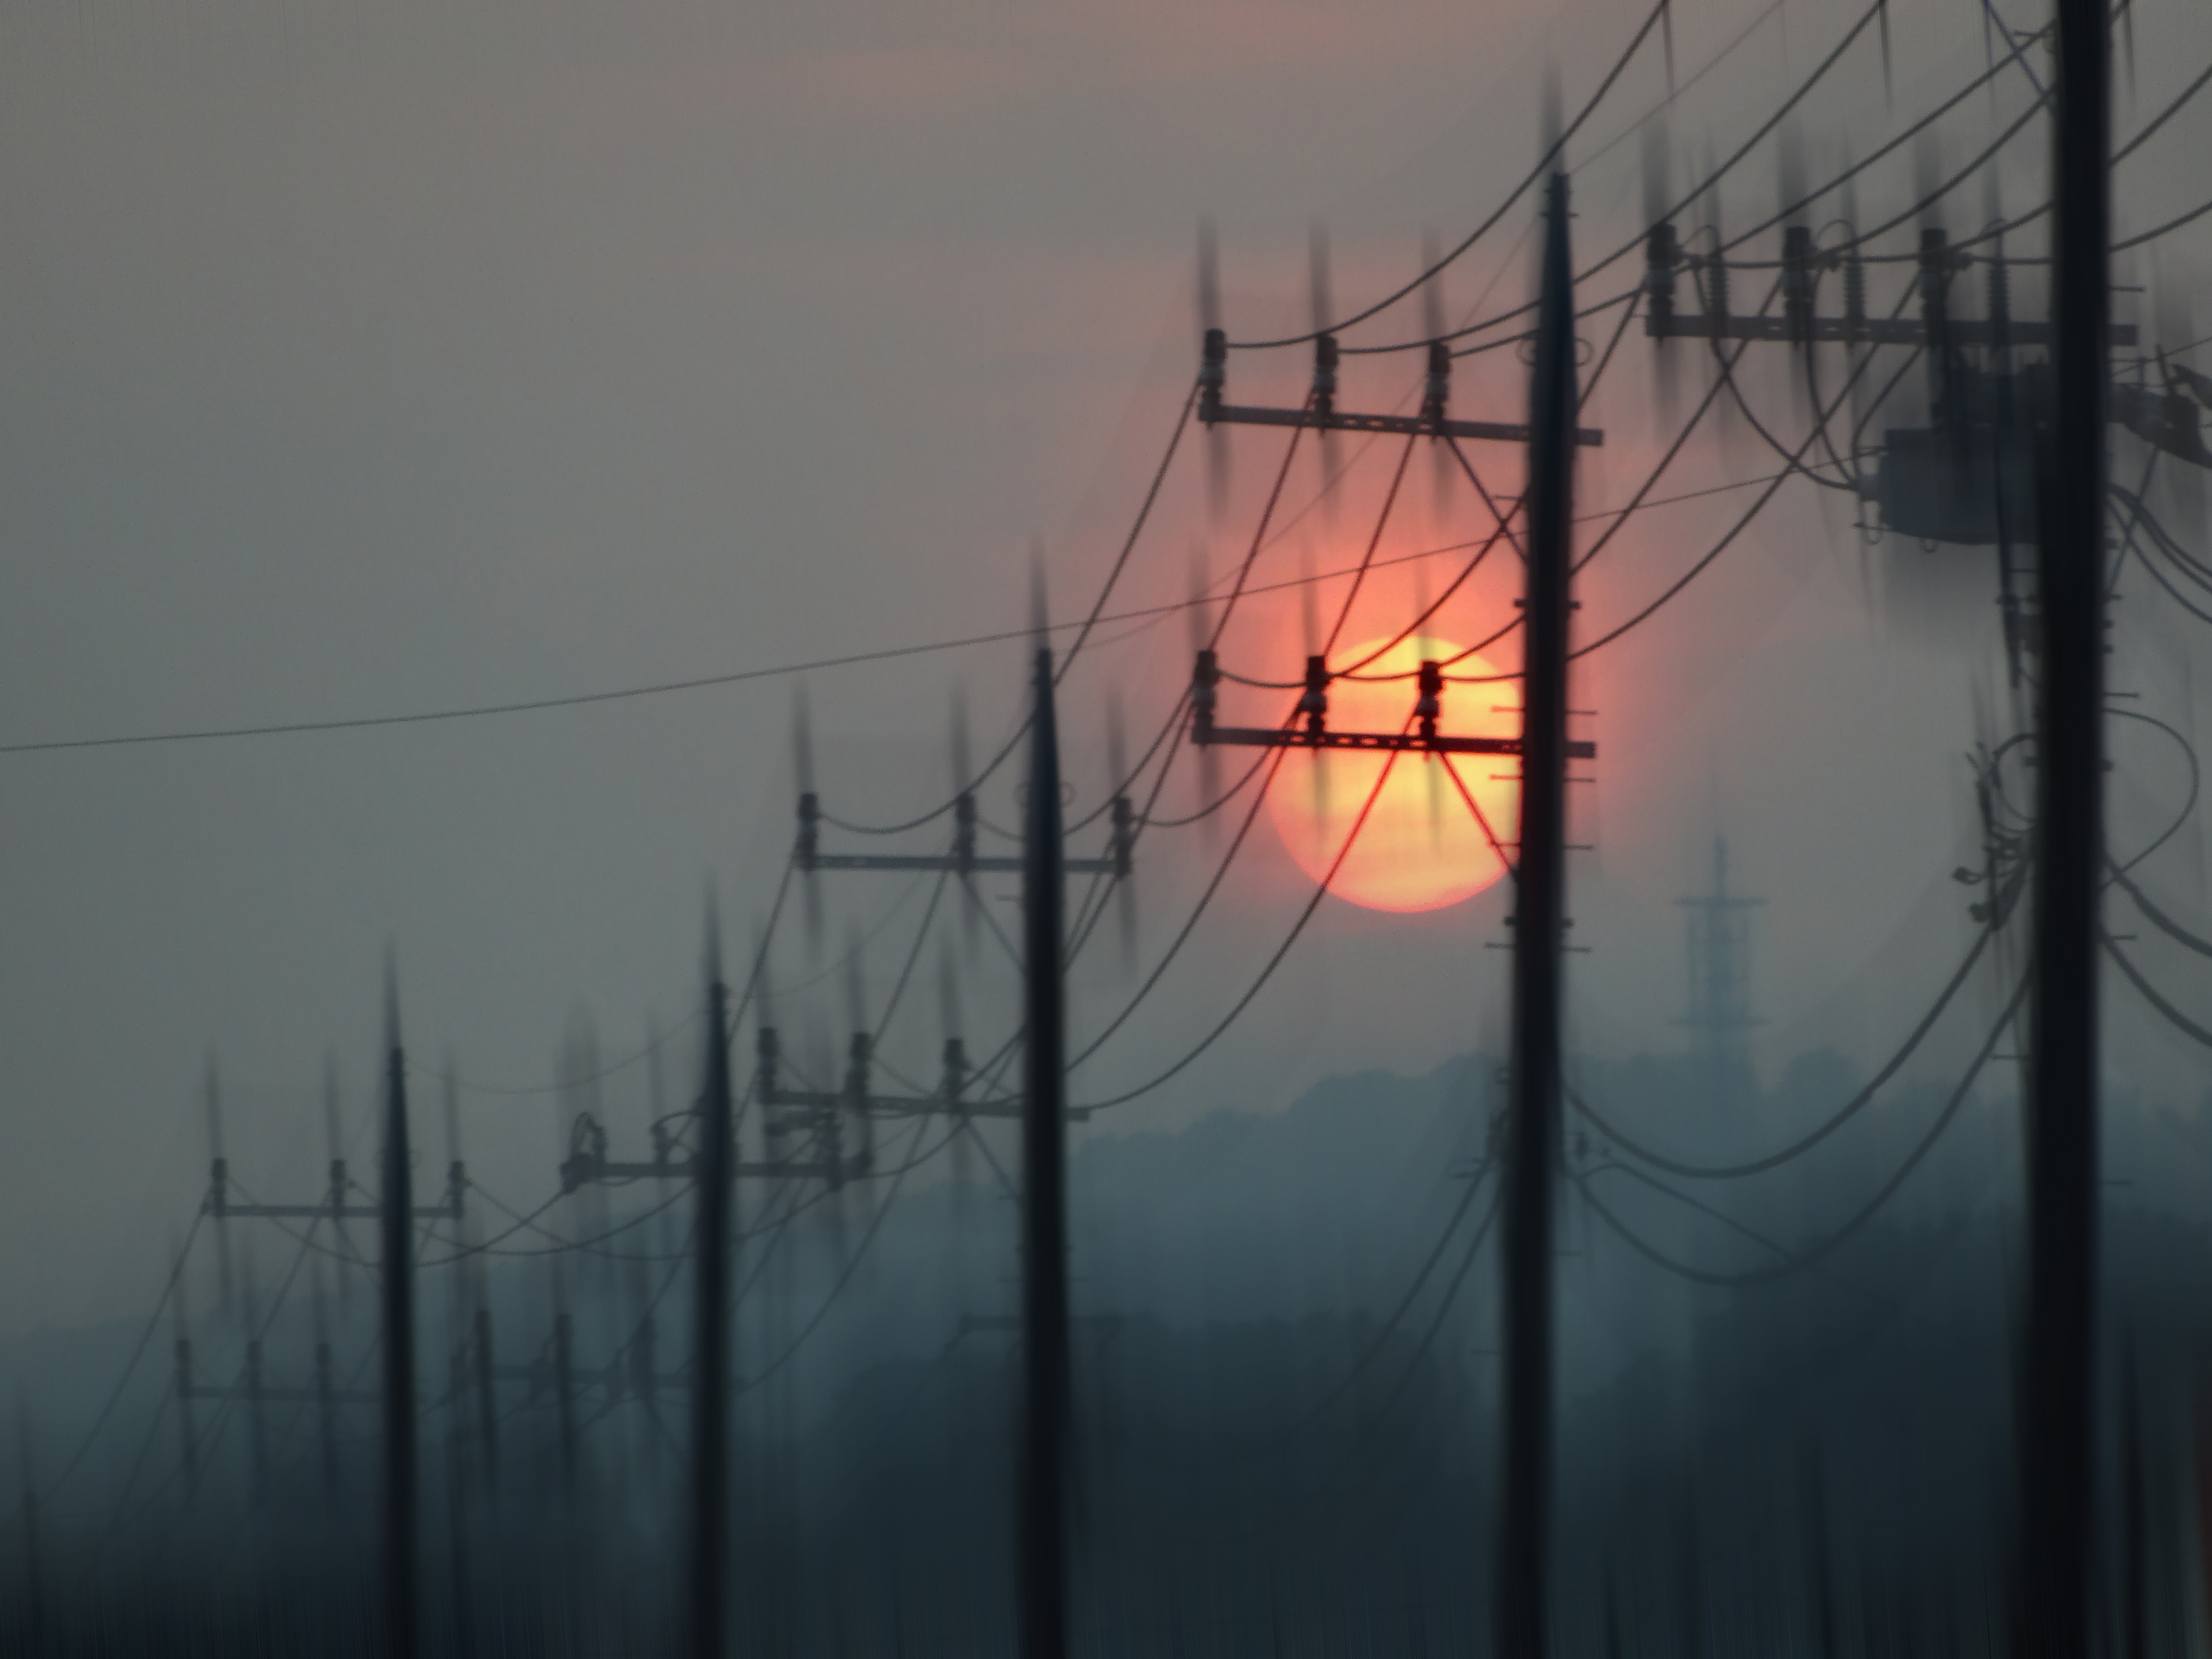 blur, wires, sunset, sun, miscellanea, miscellaneous, smooth, pillars, posts, wire 2160p